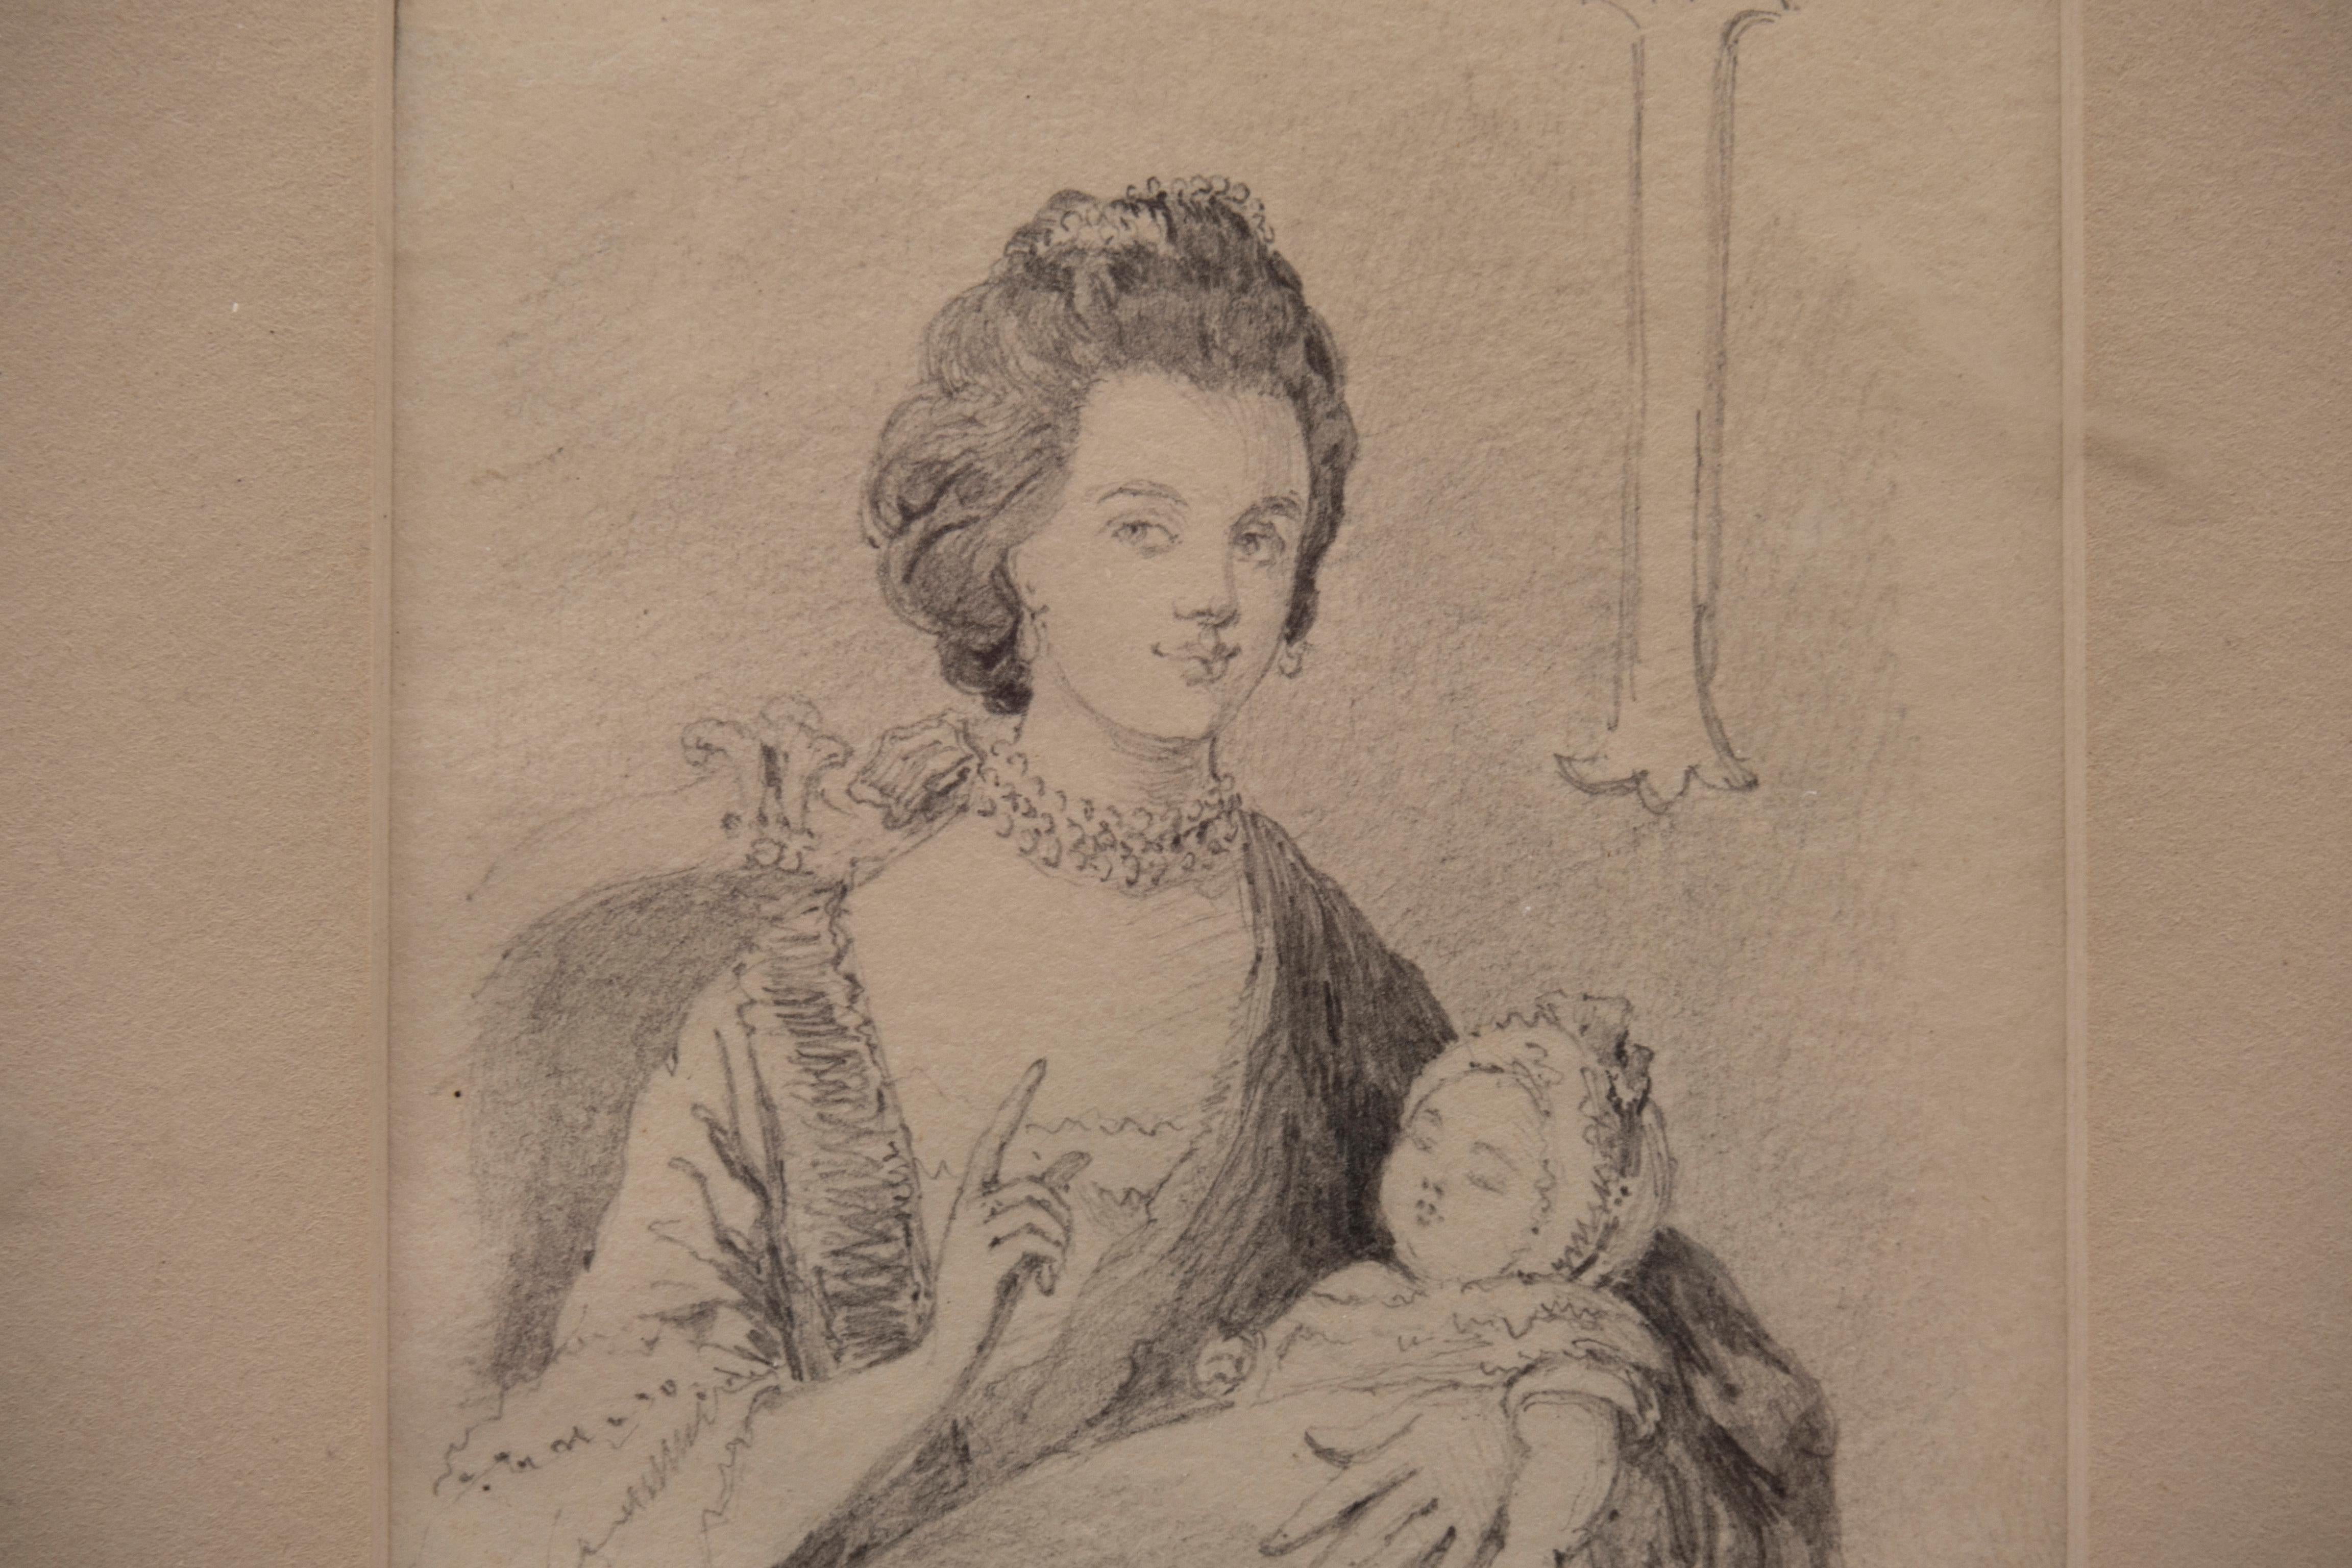 Mid-19th Century Pencil Drawing Of George IV By William M. Thackeray From The Hearst Collection